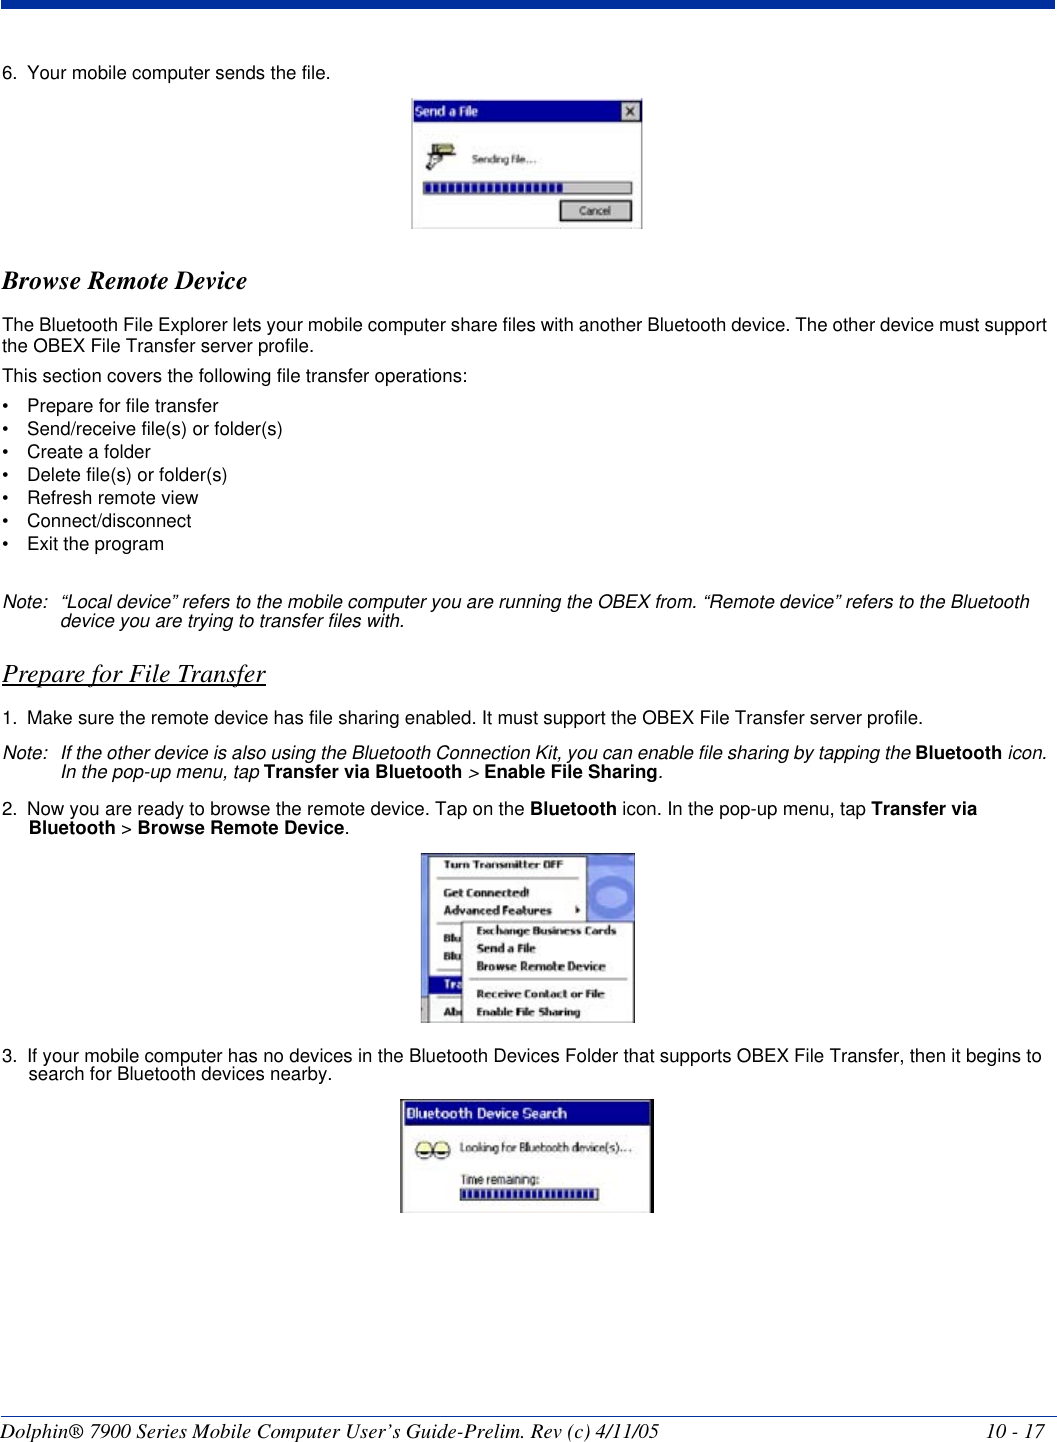 Dolphin® 7900 Series Mobile Computer User’s Guide-Prelim. Rev (c) 4/11/05 10 - 176. Your mobile computer sends the file.Browse Remote DeviceThe Bluetooth File Explorer lets your mobile computer share files with another Bluetooth device. The other device must support the OBEX File Transfer server profile.This section covers the following file transfer operations:• Prepare for file transfer• Send/receive file(s) or folder(s)• Create a folder• Delete file(s) or folder(s)• Refresh remote view• Connect/disconnect• Exit the programNote: “Local device” refers to the mobile computer you are running the OBEX from. “Remote device” refers to the Bluetooth device you are trying to transfer files with.Prepare for File Transfer1. Make sure the remote device has file sharing enabled. It must support the OBEX File Transfer server profile.Note: If the other device is also using the Bluetooth Connection Kit, you can enable file sharing by tapping the Bluetooth icon. In the pop-up menu, tap Transfer via Bluetooth &gt; Enable File Sharing.2. Now you are ready to browse the remote device. Tap on the Bluetooth icon. In the pop-up menu, tap Transfer via Bluetooth &gt; Browse Remote Device.3. If your mobile computer has no devices in the Bluetooth Devices Folder that supports OBEX File Transfer, then it begins to search for Bluetooth devices nearby.